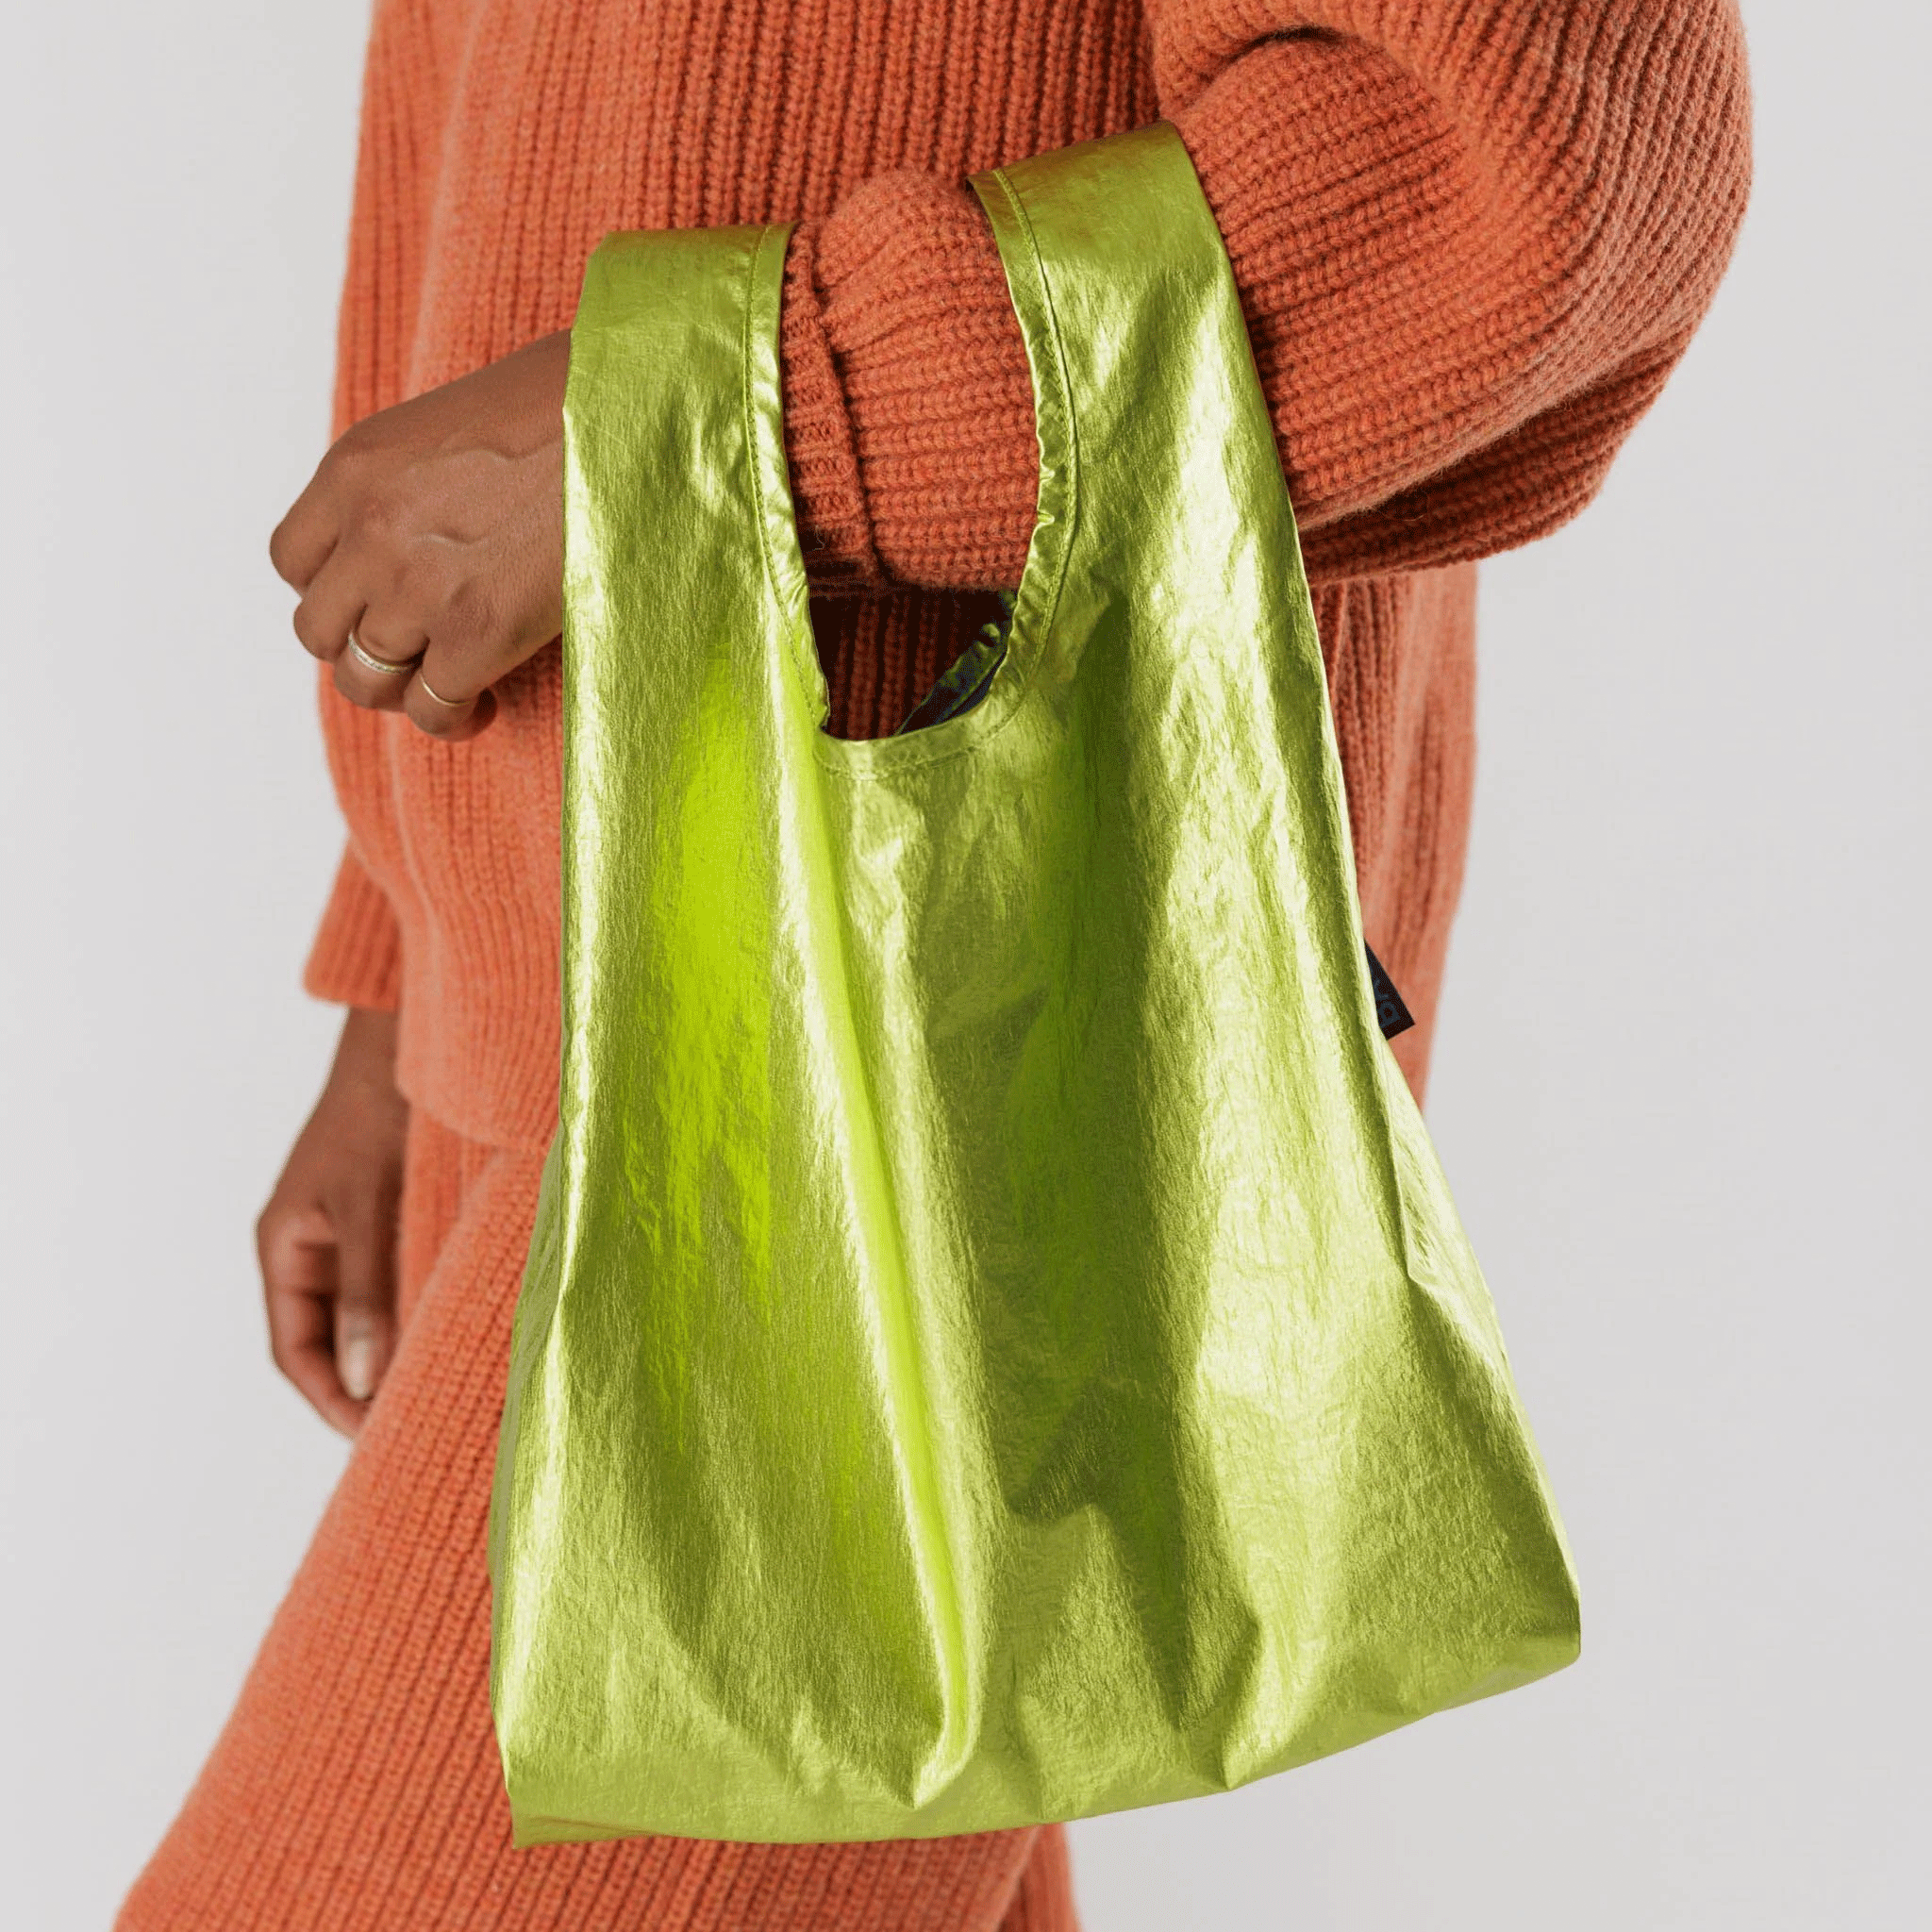 On a cream background is a model holding a neon green metallic nylon bag.